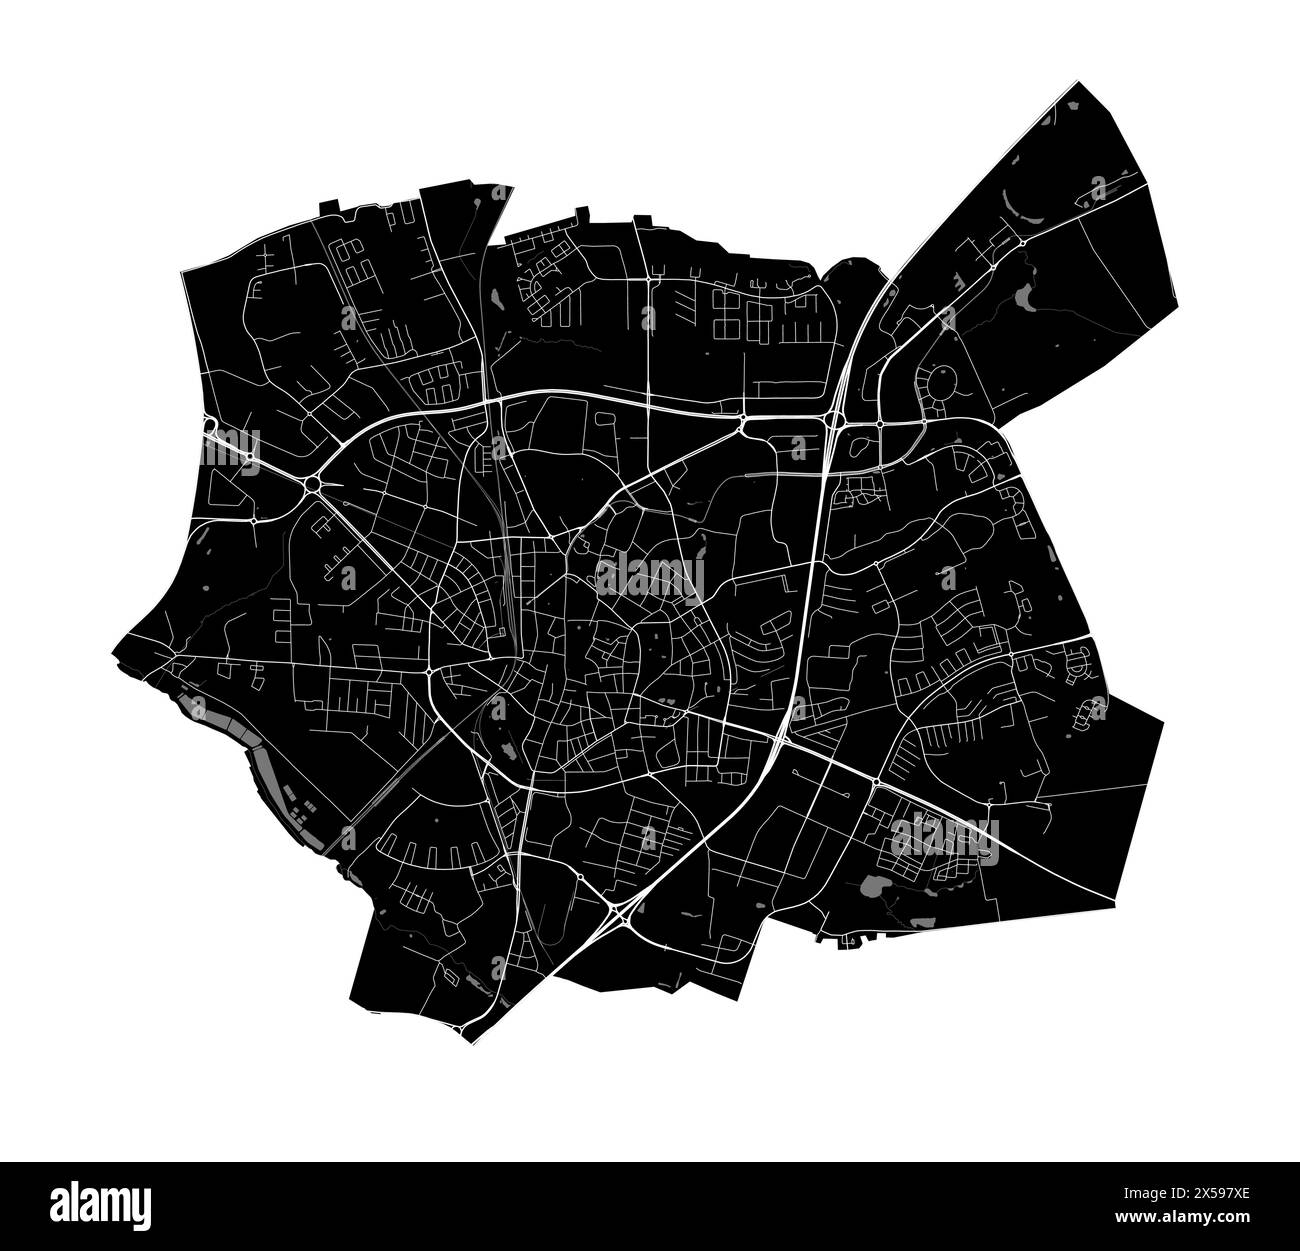 Map of Lund, Sweden. Detailed city vector map, metropolitan area with border. Black and white streetmap with roads and water. Stock Vector